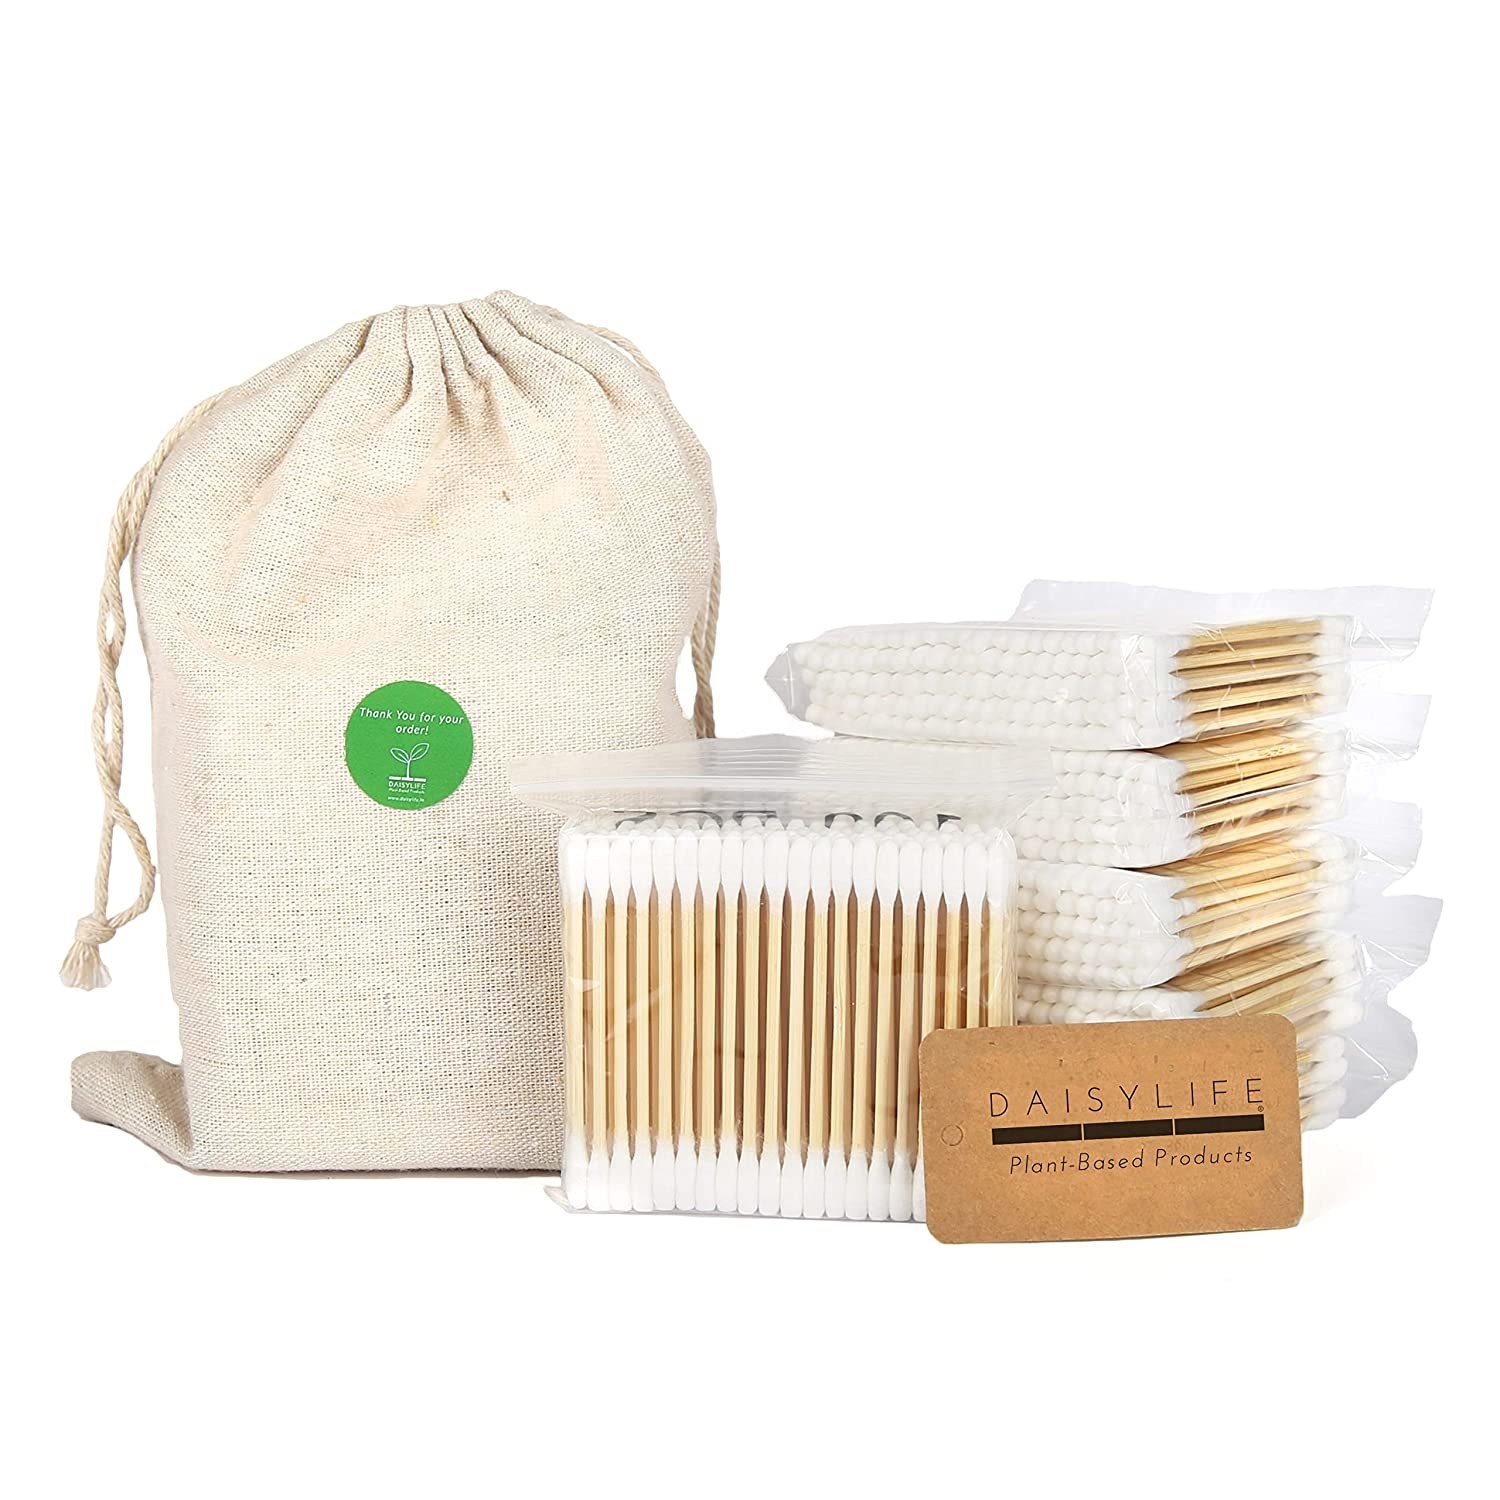 Multiple packs of wooden cotton swabs next to a carrying pouch